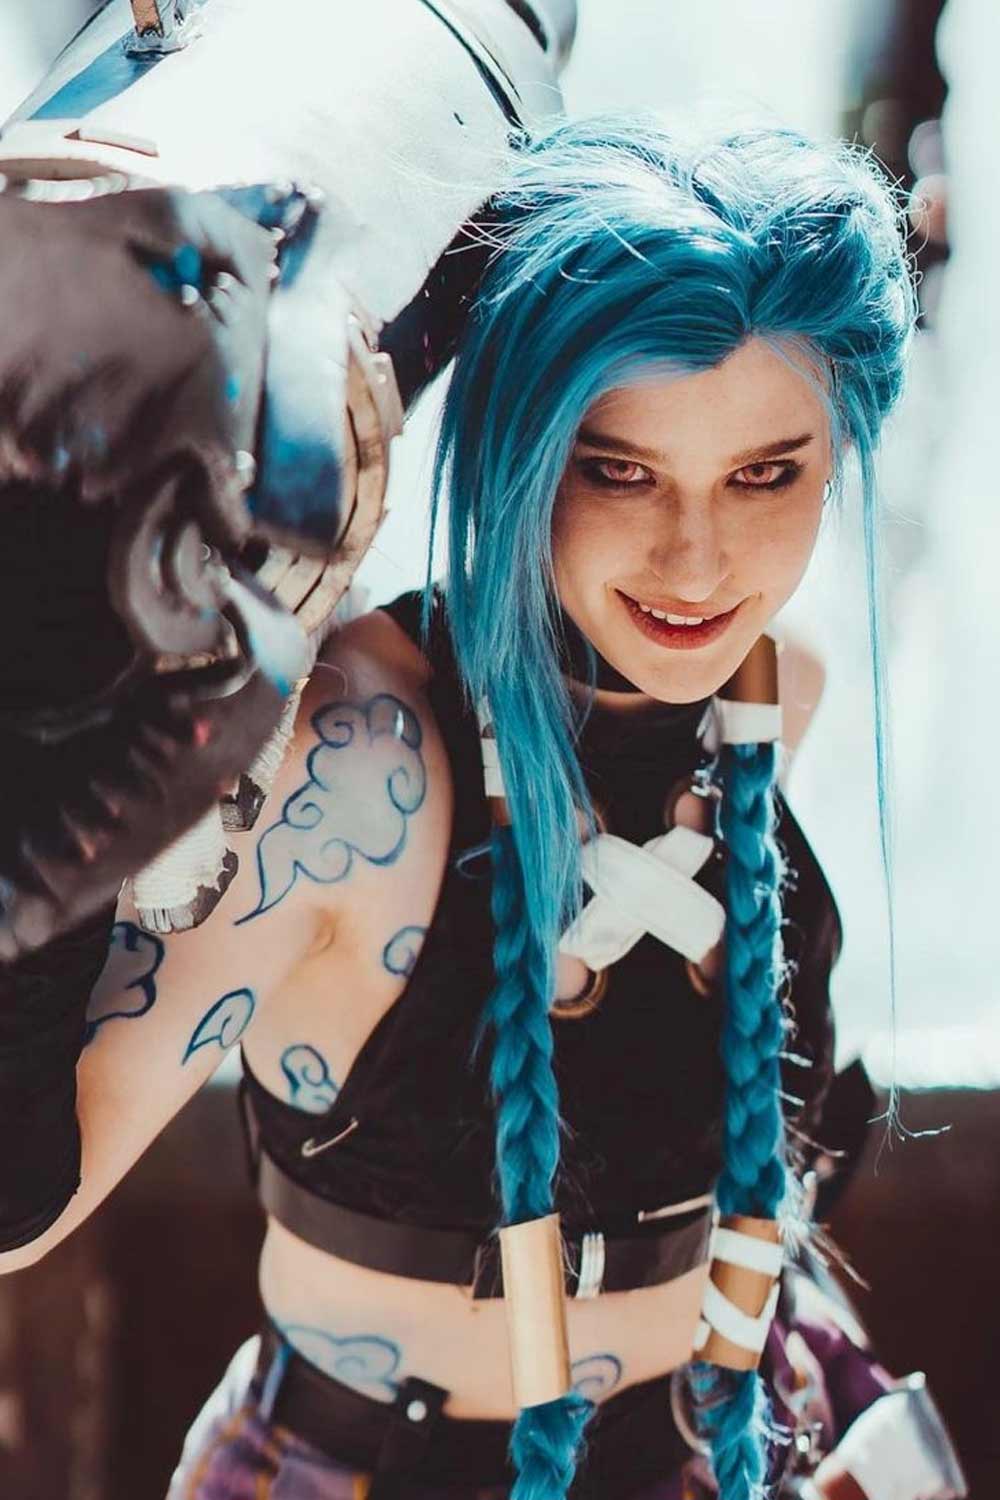 Jinx from League of Legends Costume for Halloween